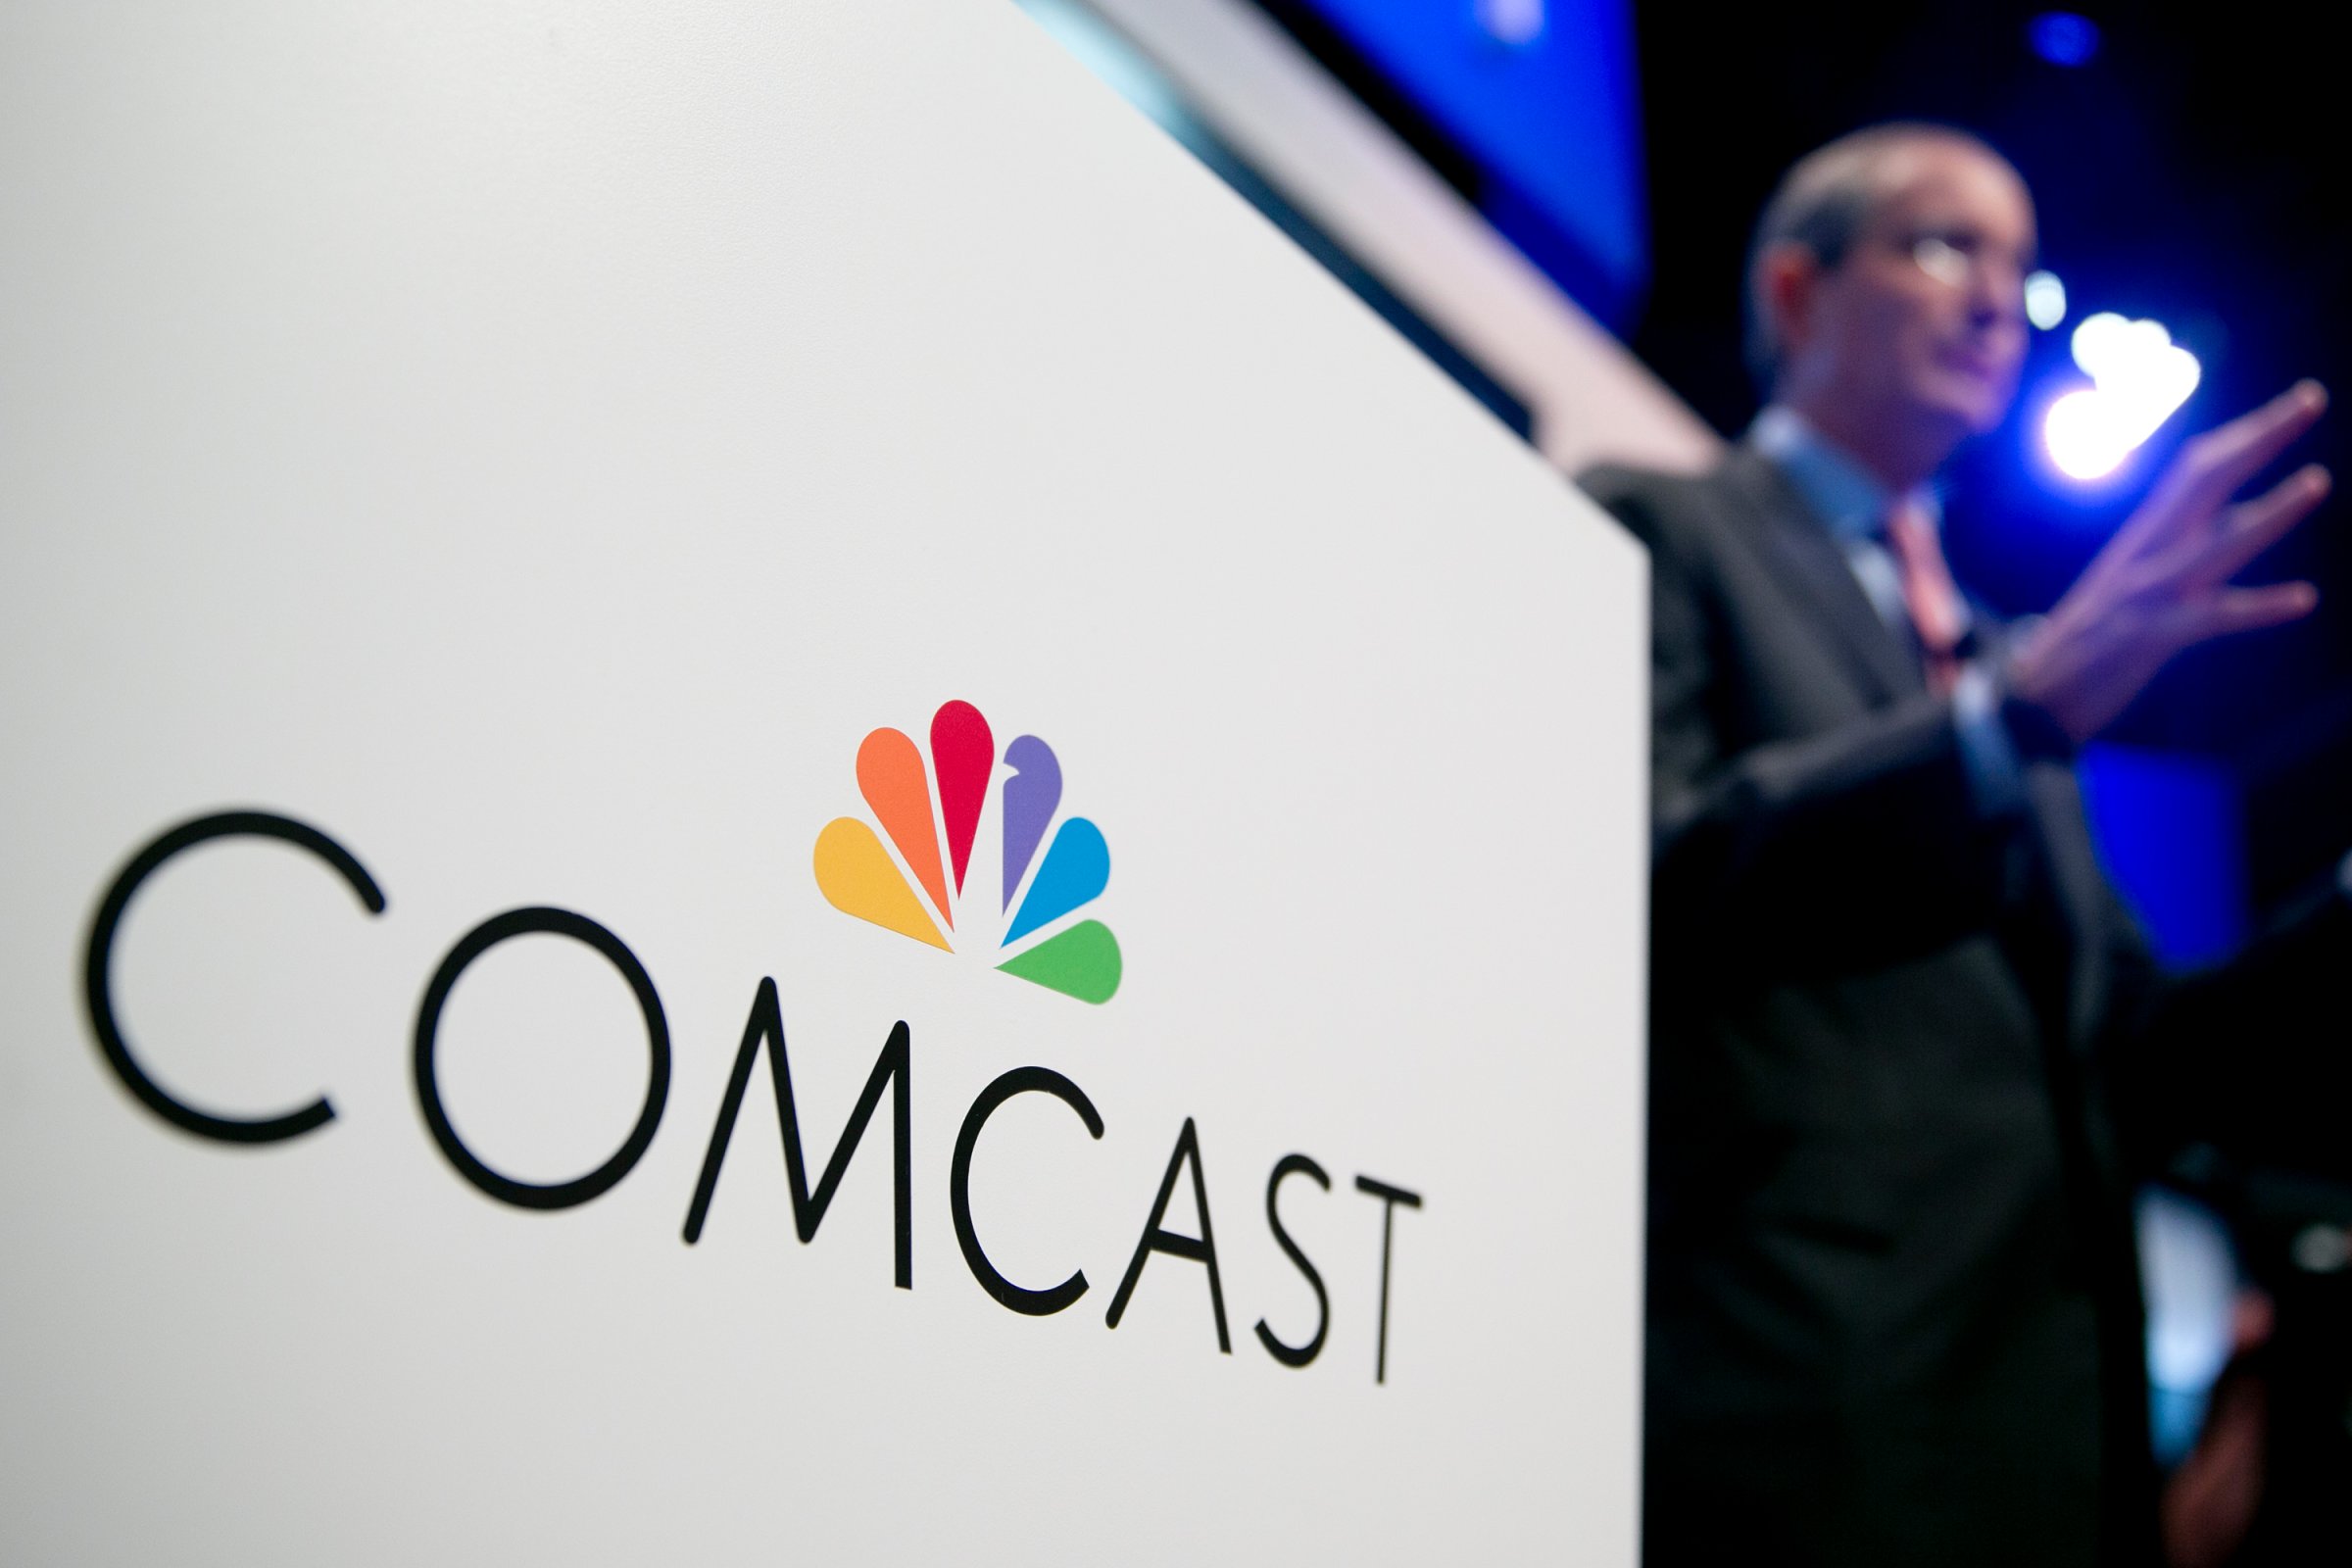 The Comcast Corp. logo is seen as Brian Roberts, chairman and chief executive officer of Comcast Corp., right, speaks during a news conference at the National Cable and Telecommunications Association (NCTA) Cable Show in Washington, D.C., U.S., on Tuesday, June 11, 2013.